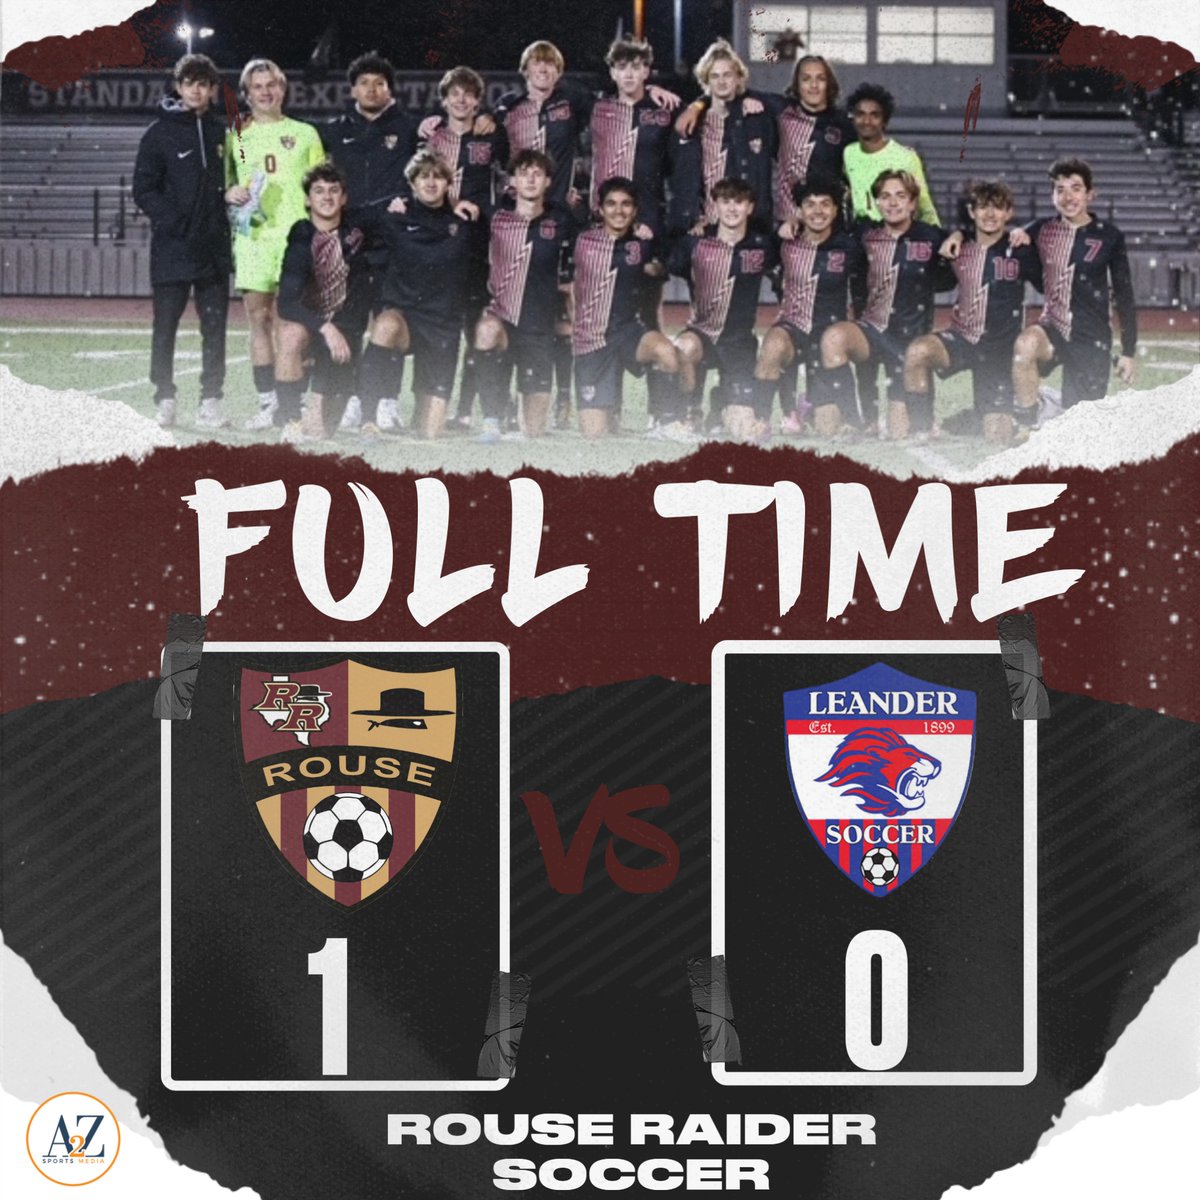 Raiders with the big district win vs Leander @RouseSoccer @RouseScrBooster @DKnight111